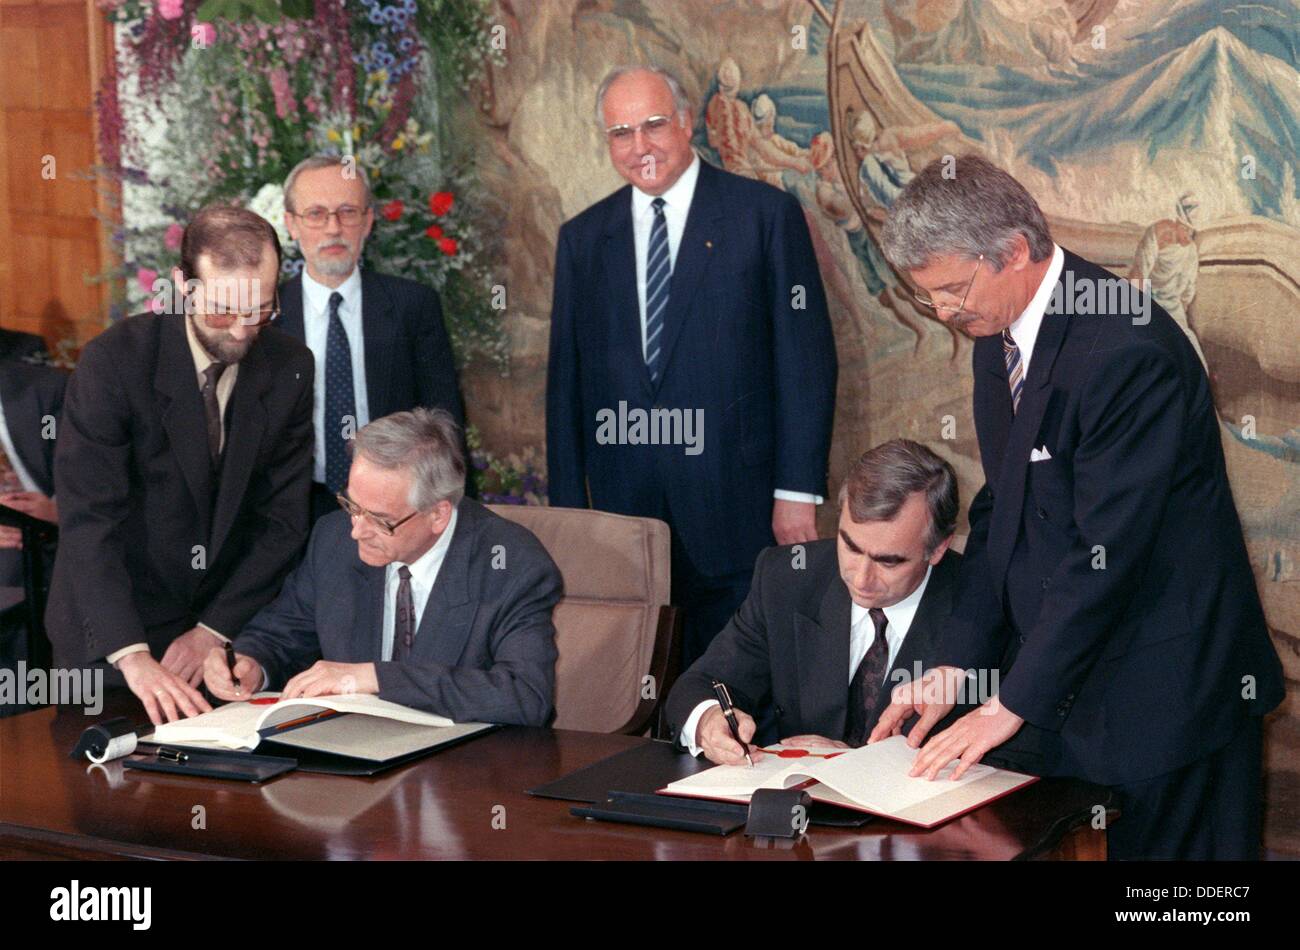 Minister president of the GDR Lothar de Maiziere (back, left) and German chancellor Helmut Kohl (back, m) during the signing of a contract between minister of finance of the GDR Walter Romberg (sitting, left) and Federal Minister of Finance Theo Waigel (sitting, right) on the 18th of May in 1990. The treaty became effective on the 1st of July in 1990. Stock Photo